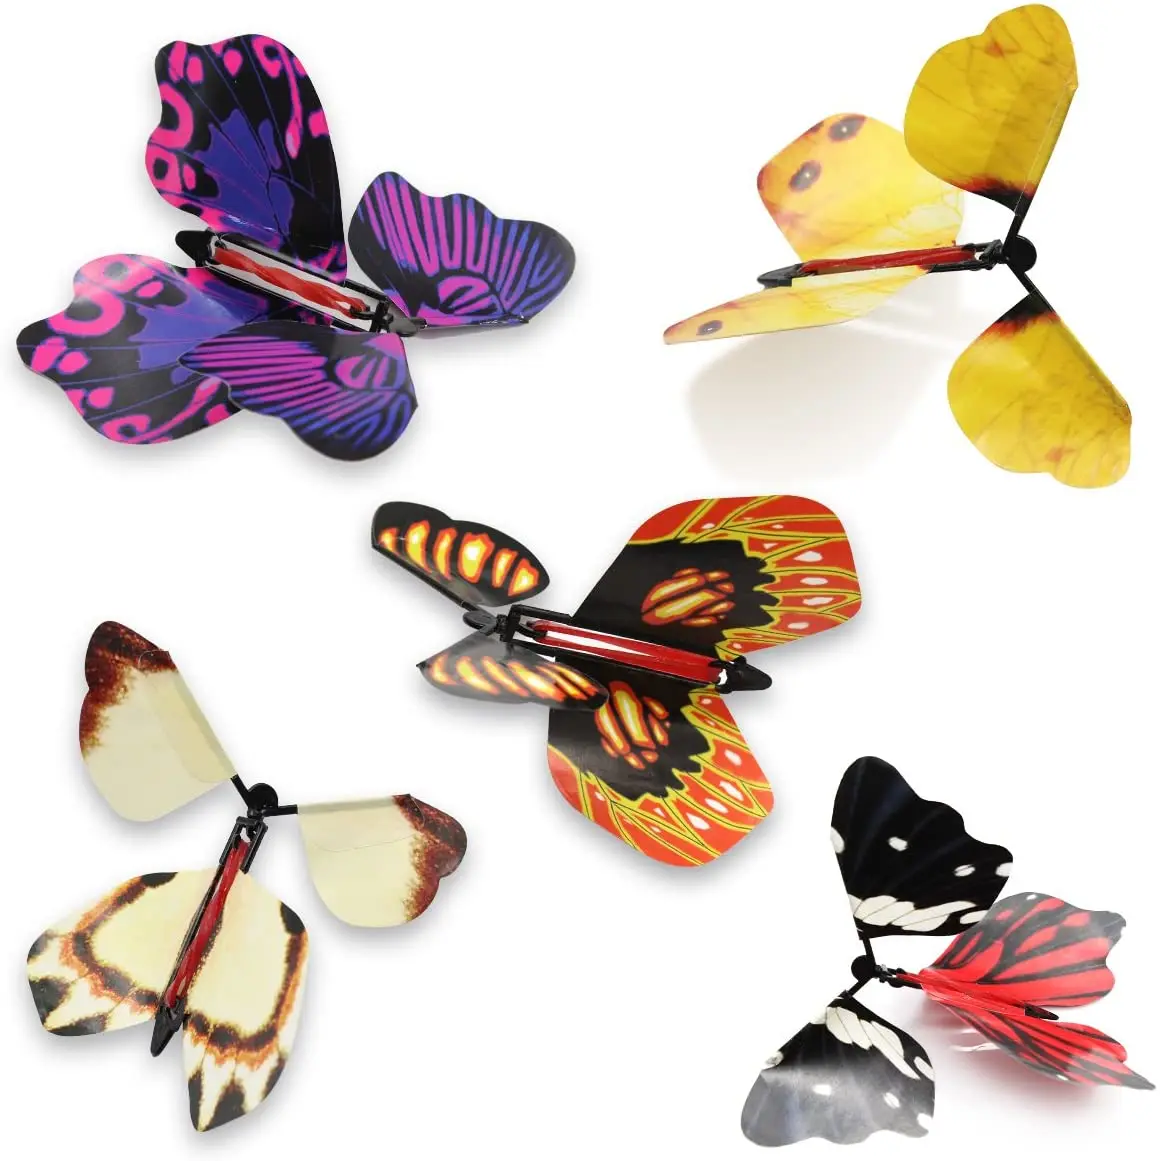 URMAGIC Magic Butterfly Flying,Wind Up Butterfly in Book Fairy Toy,Rubber Band Powered Wind Up Butterfly Toy Magic Tricks Toy for Wedding and Birthday Gifts 1pcs Random Color 